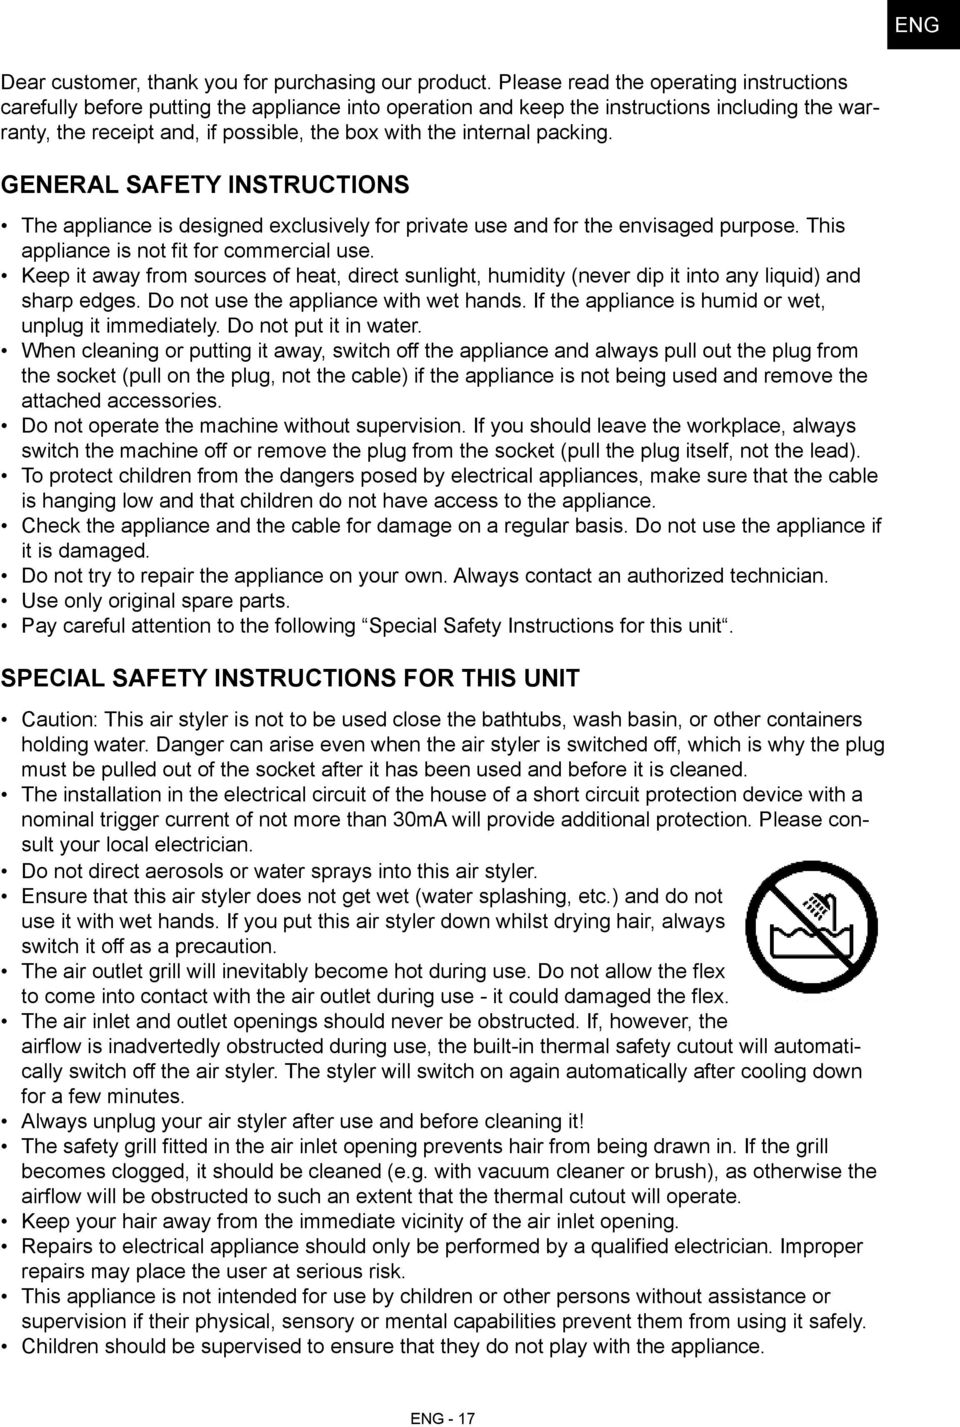 packing. General Safety Instructions The appliance is designed exclusively for private use and for the envisaged purpose. This appliance is not fit for commercial use.